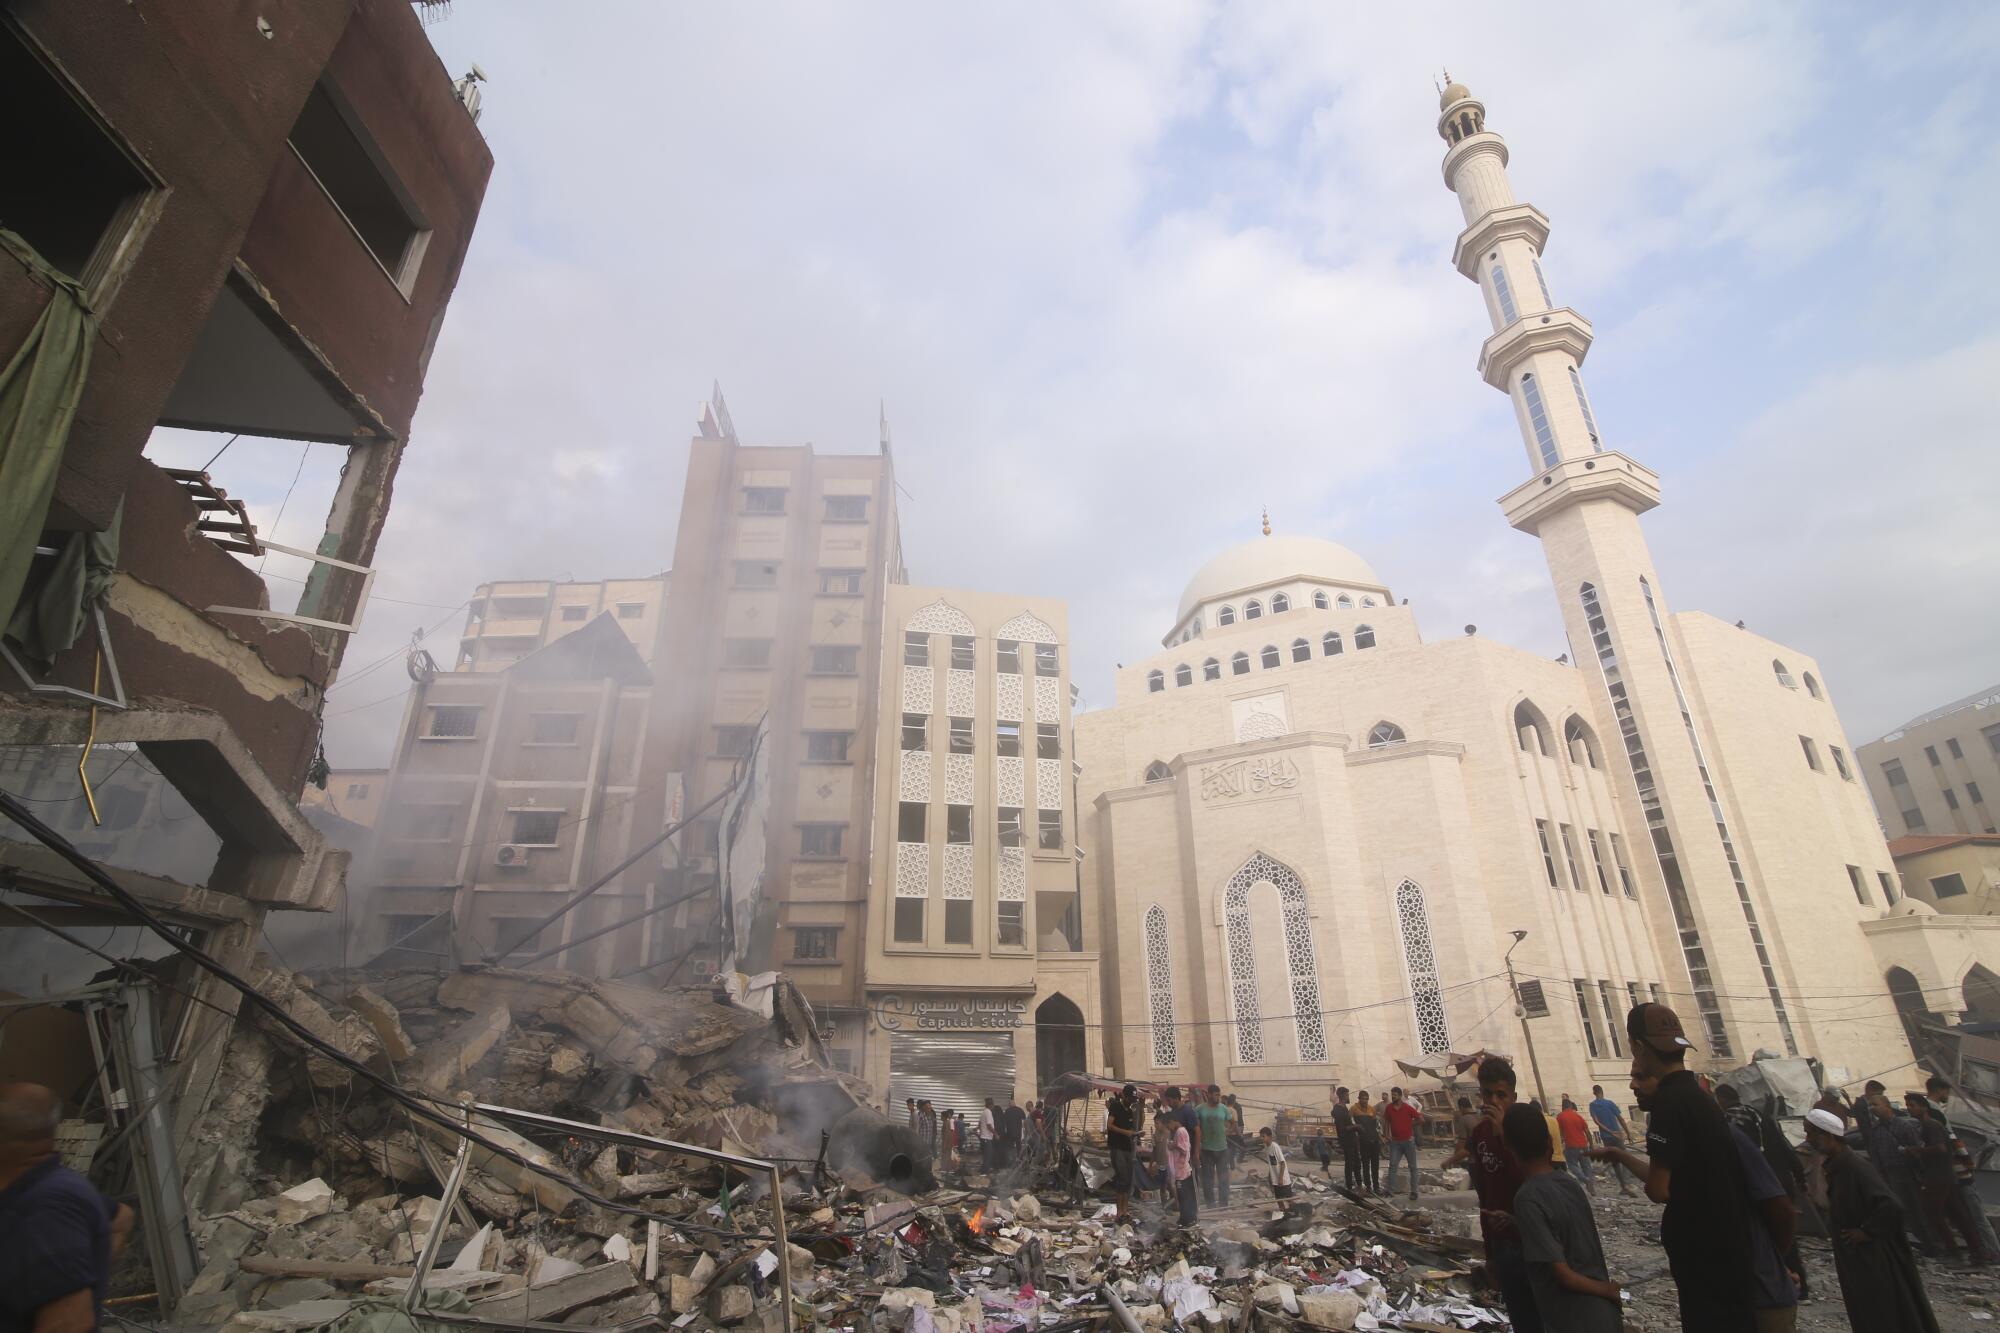 A building is reduced to rubble near a white domed mosque with a minaret and other high-rises